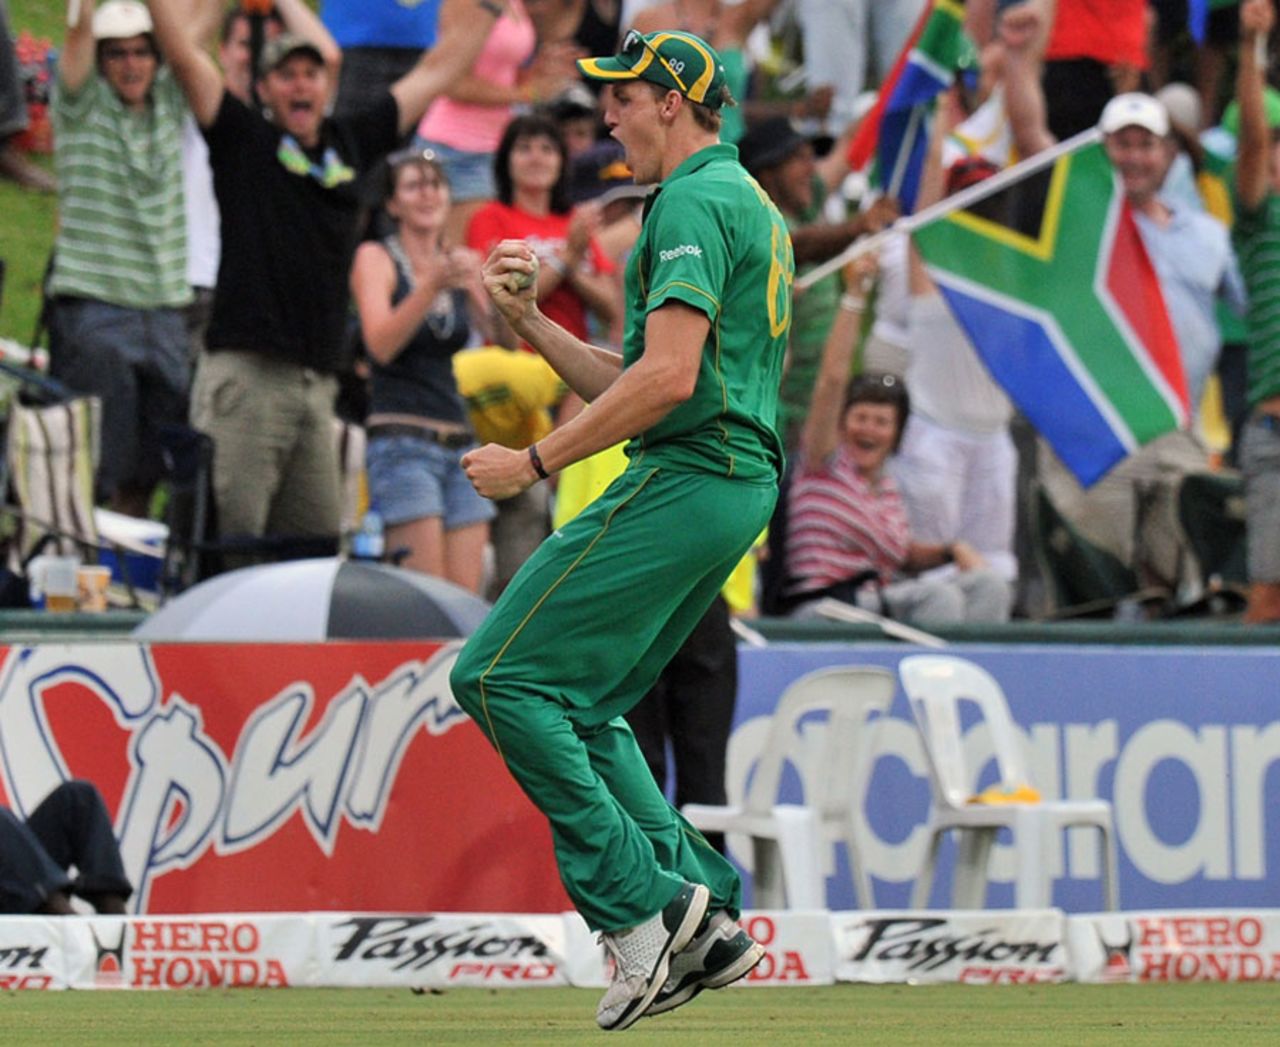 Morne Morkel takes the winning catch as South Africa take the series 3-2, South Africa v India, 5th ODI, Centurion, January 23, 2011